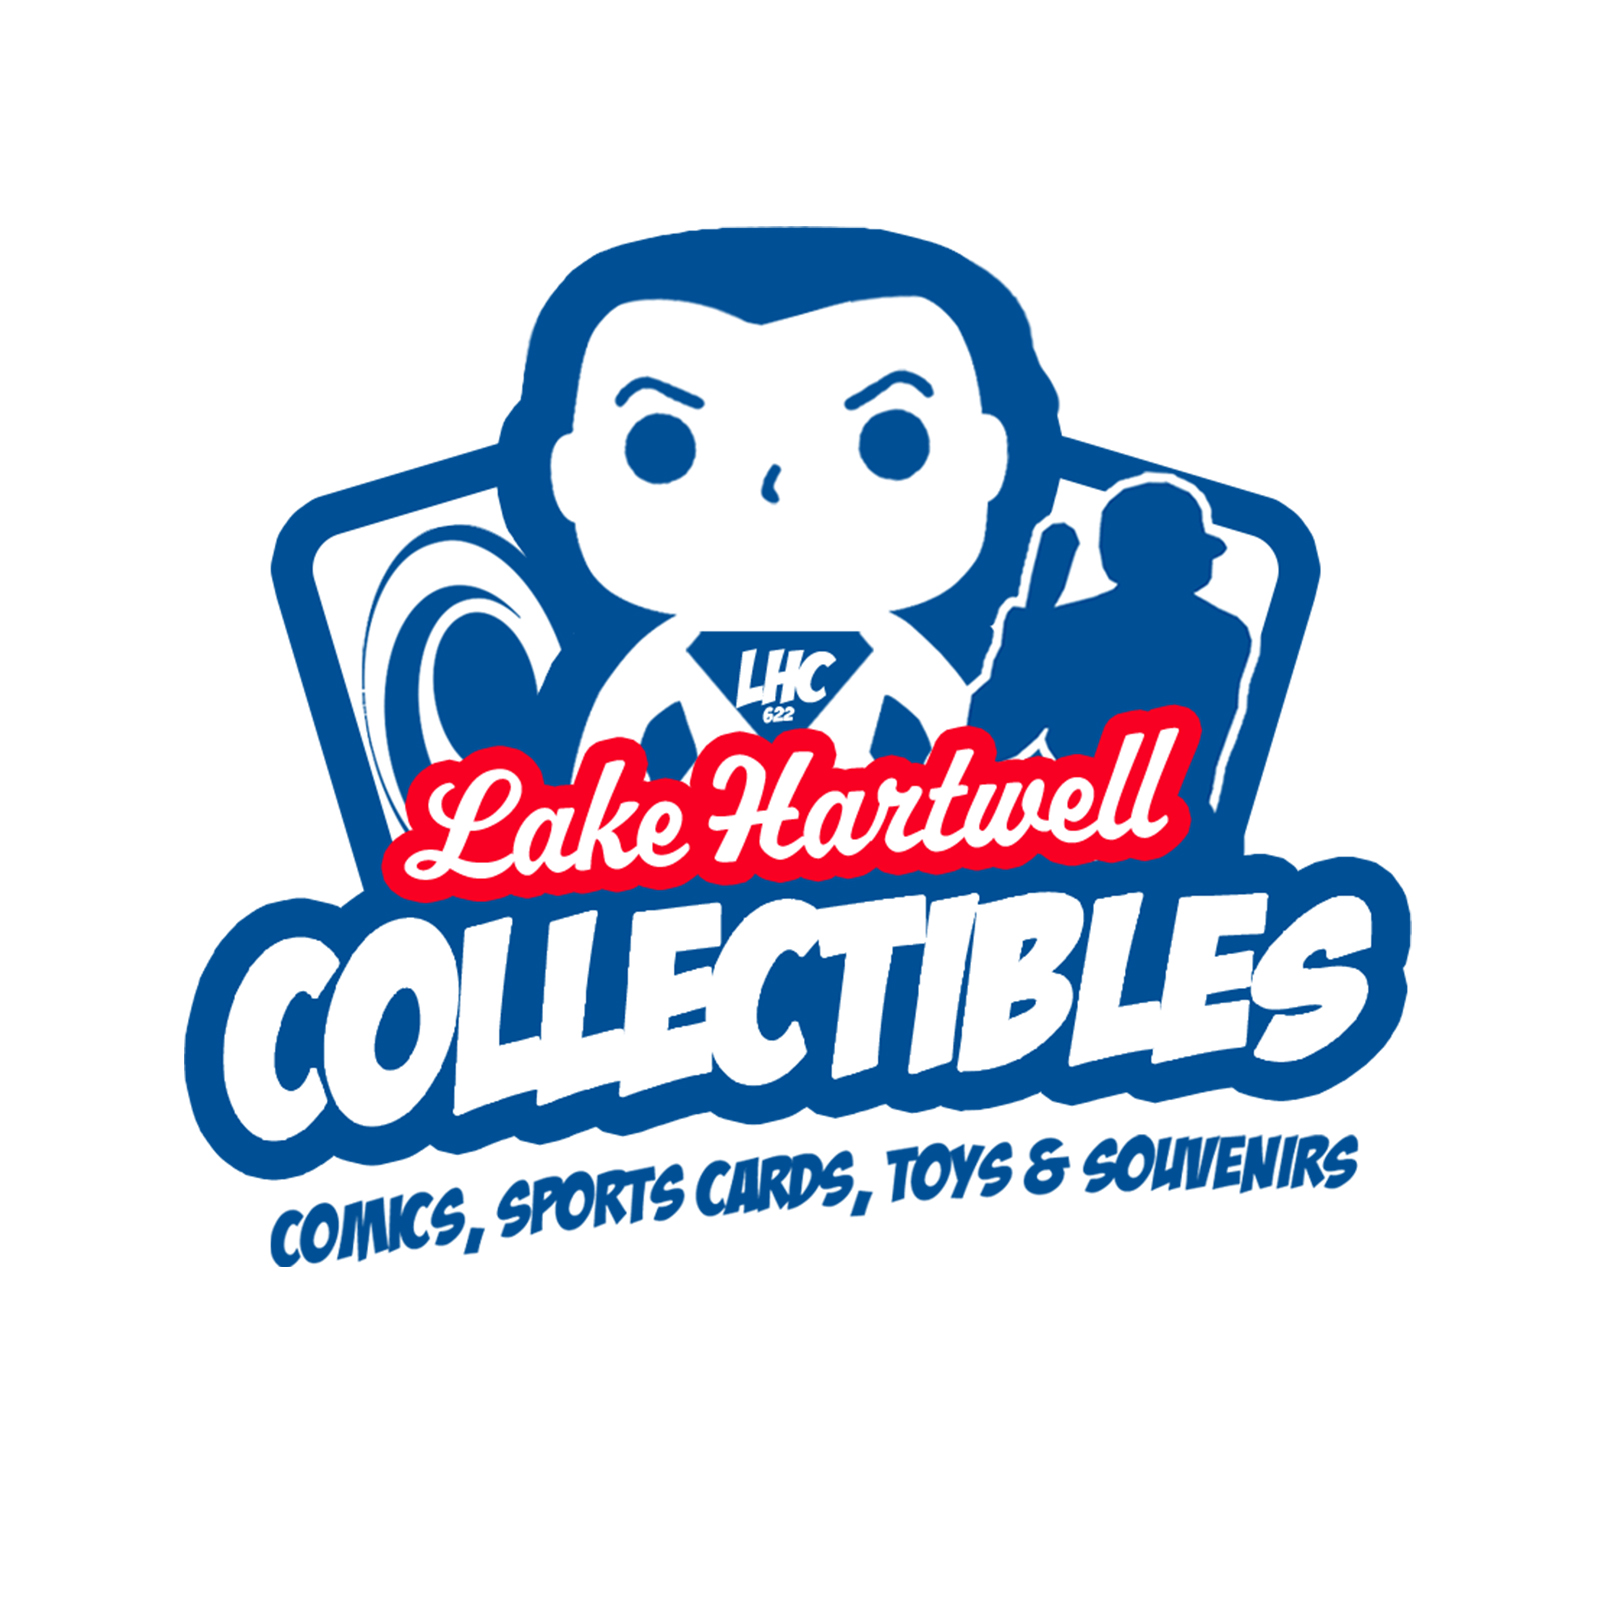 LAKE HARTWELL COLLECTIBLES